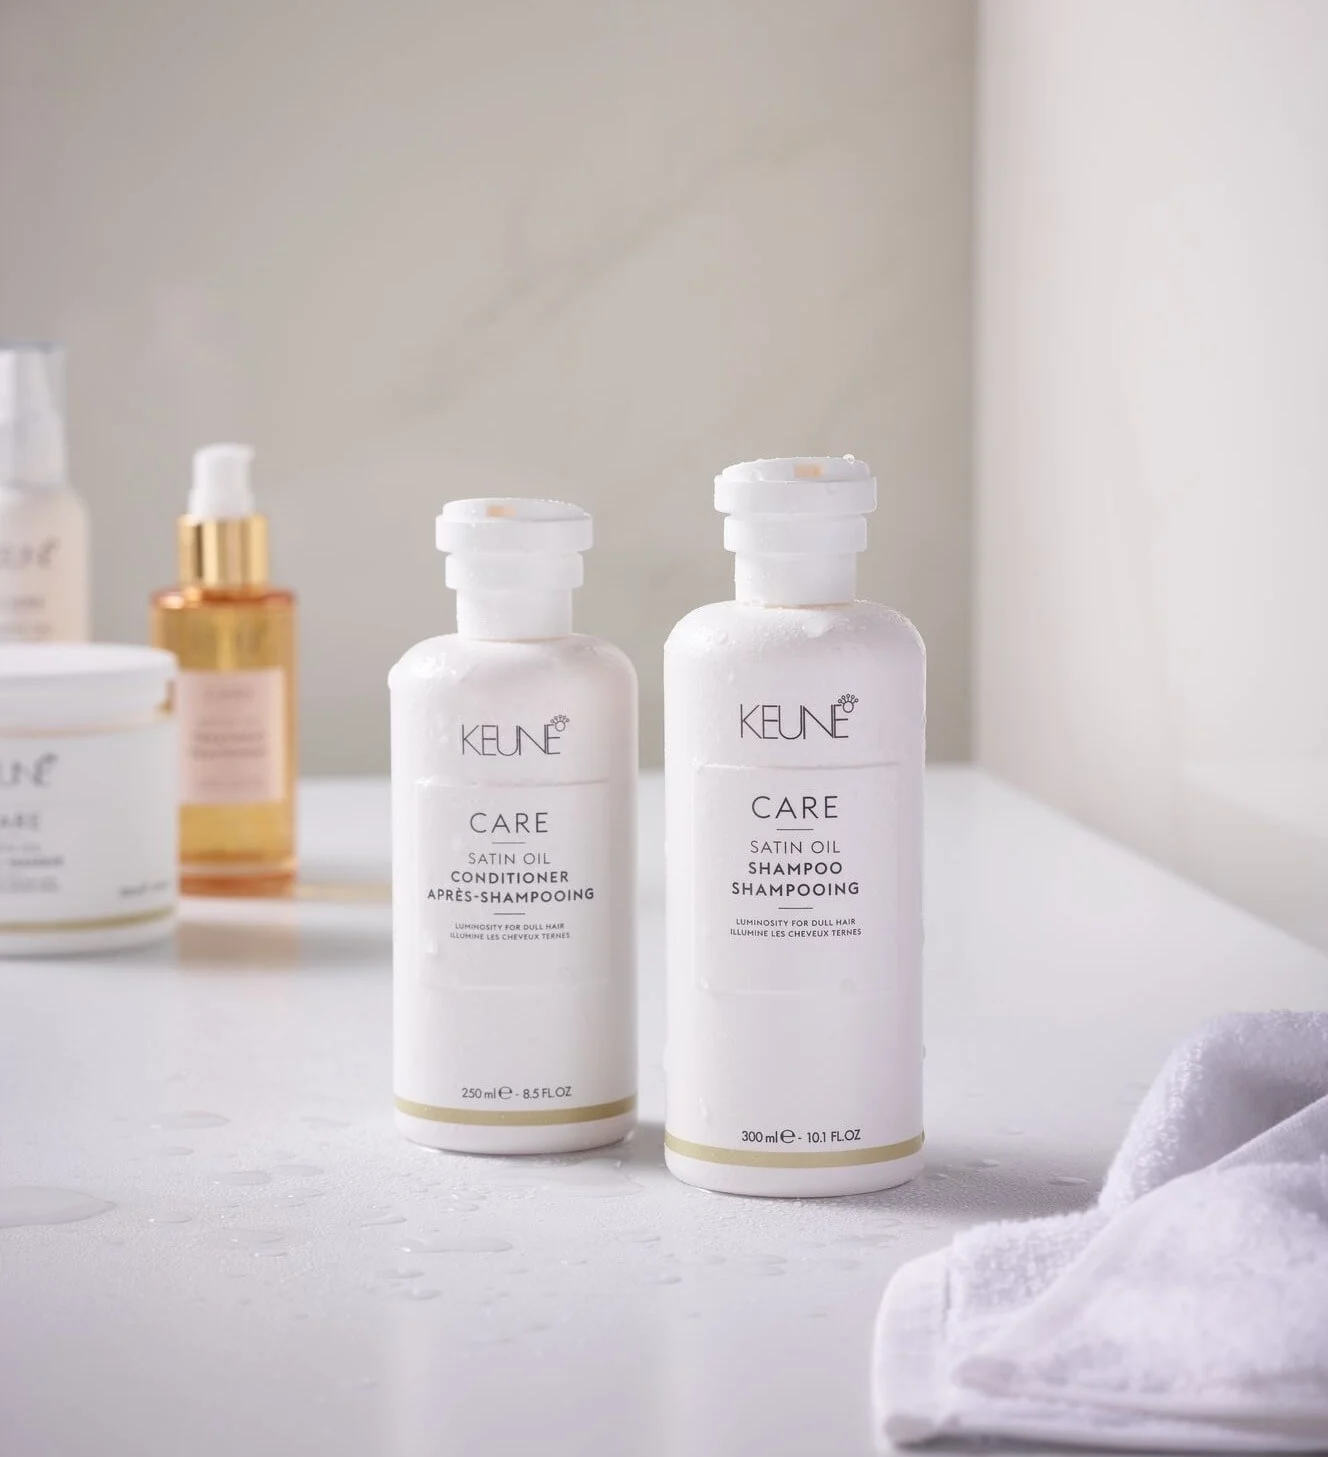 Image of Keune Satin Oil Shampoo and conditioner